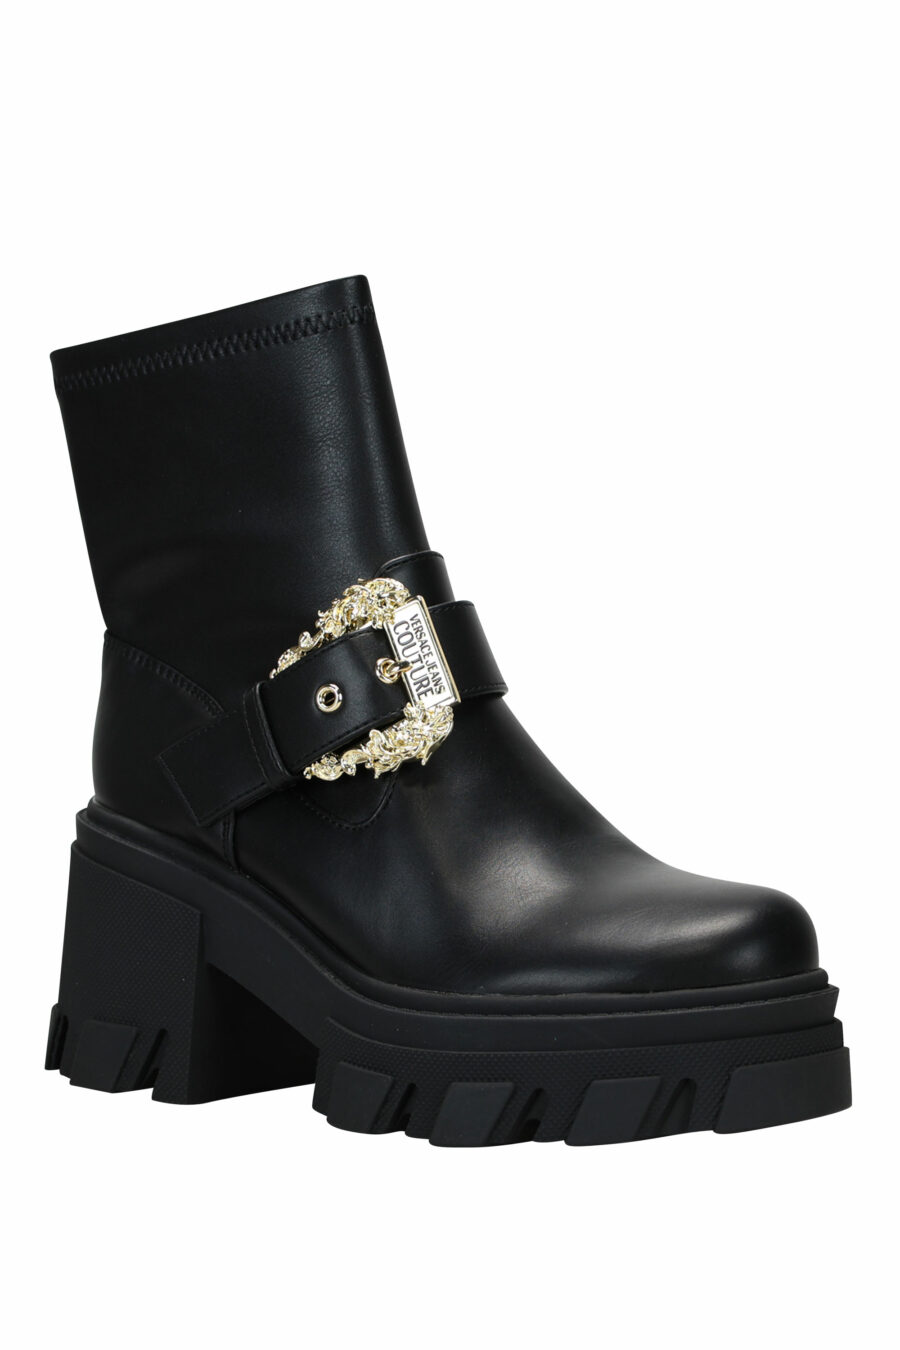 Black ankle boots with baroque buckle and platform - 8052019461084 1